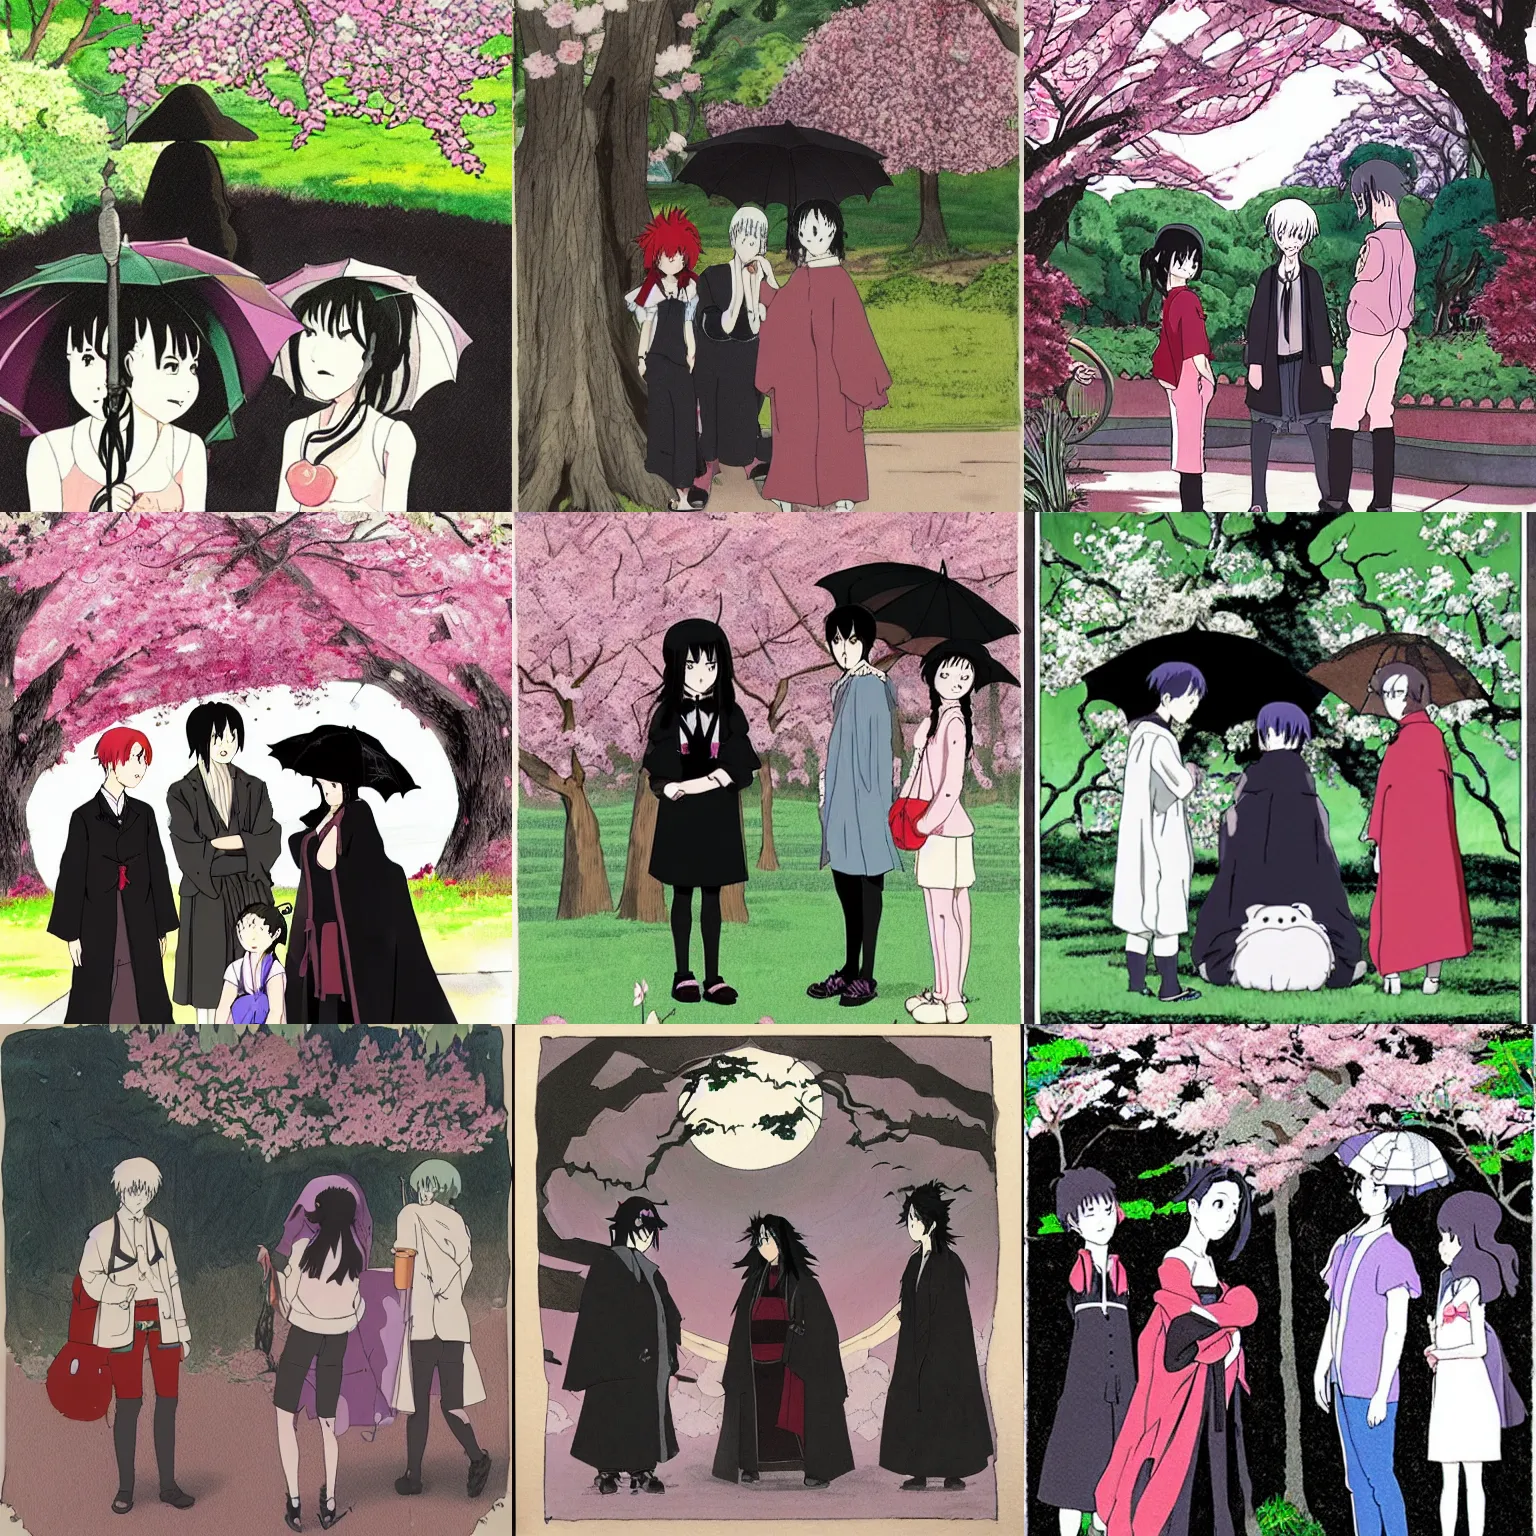 Prompt: art by studio ghibli depicting three goths loitering in the shade, talking beneath a cherry blossom outside a blockbuster video store.